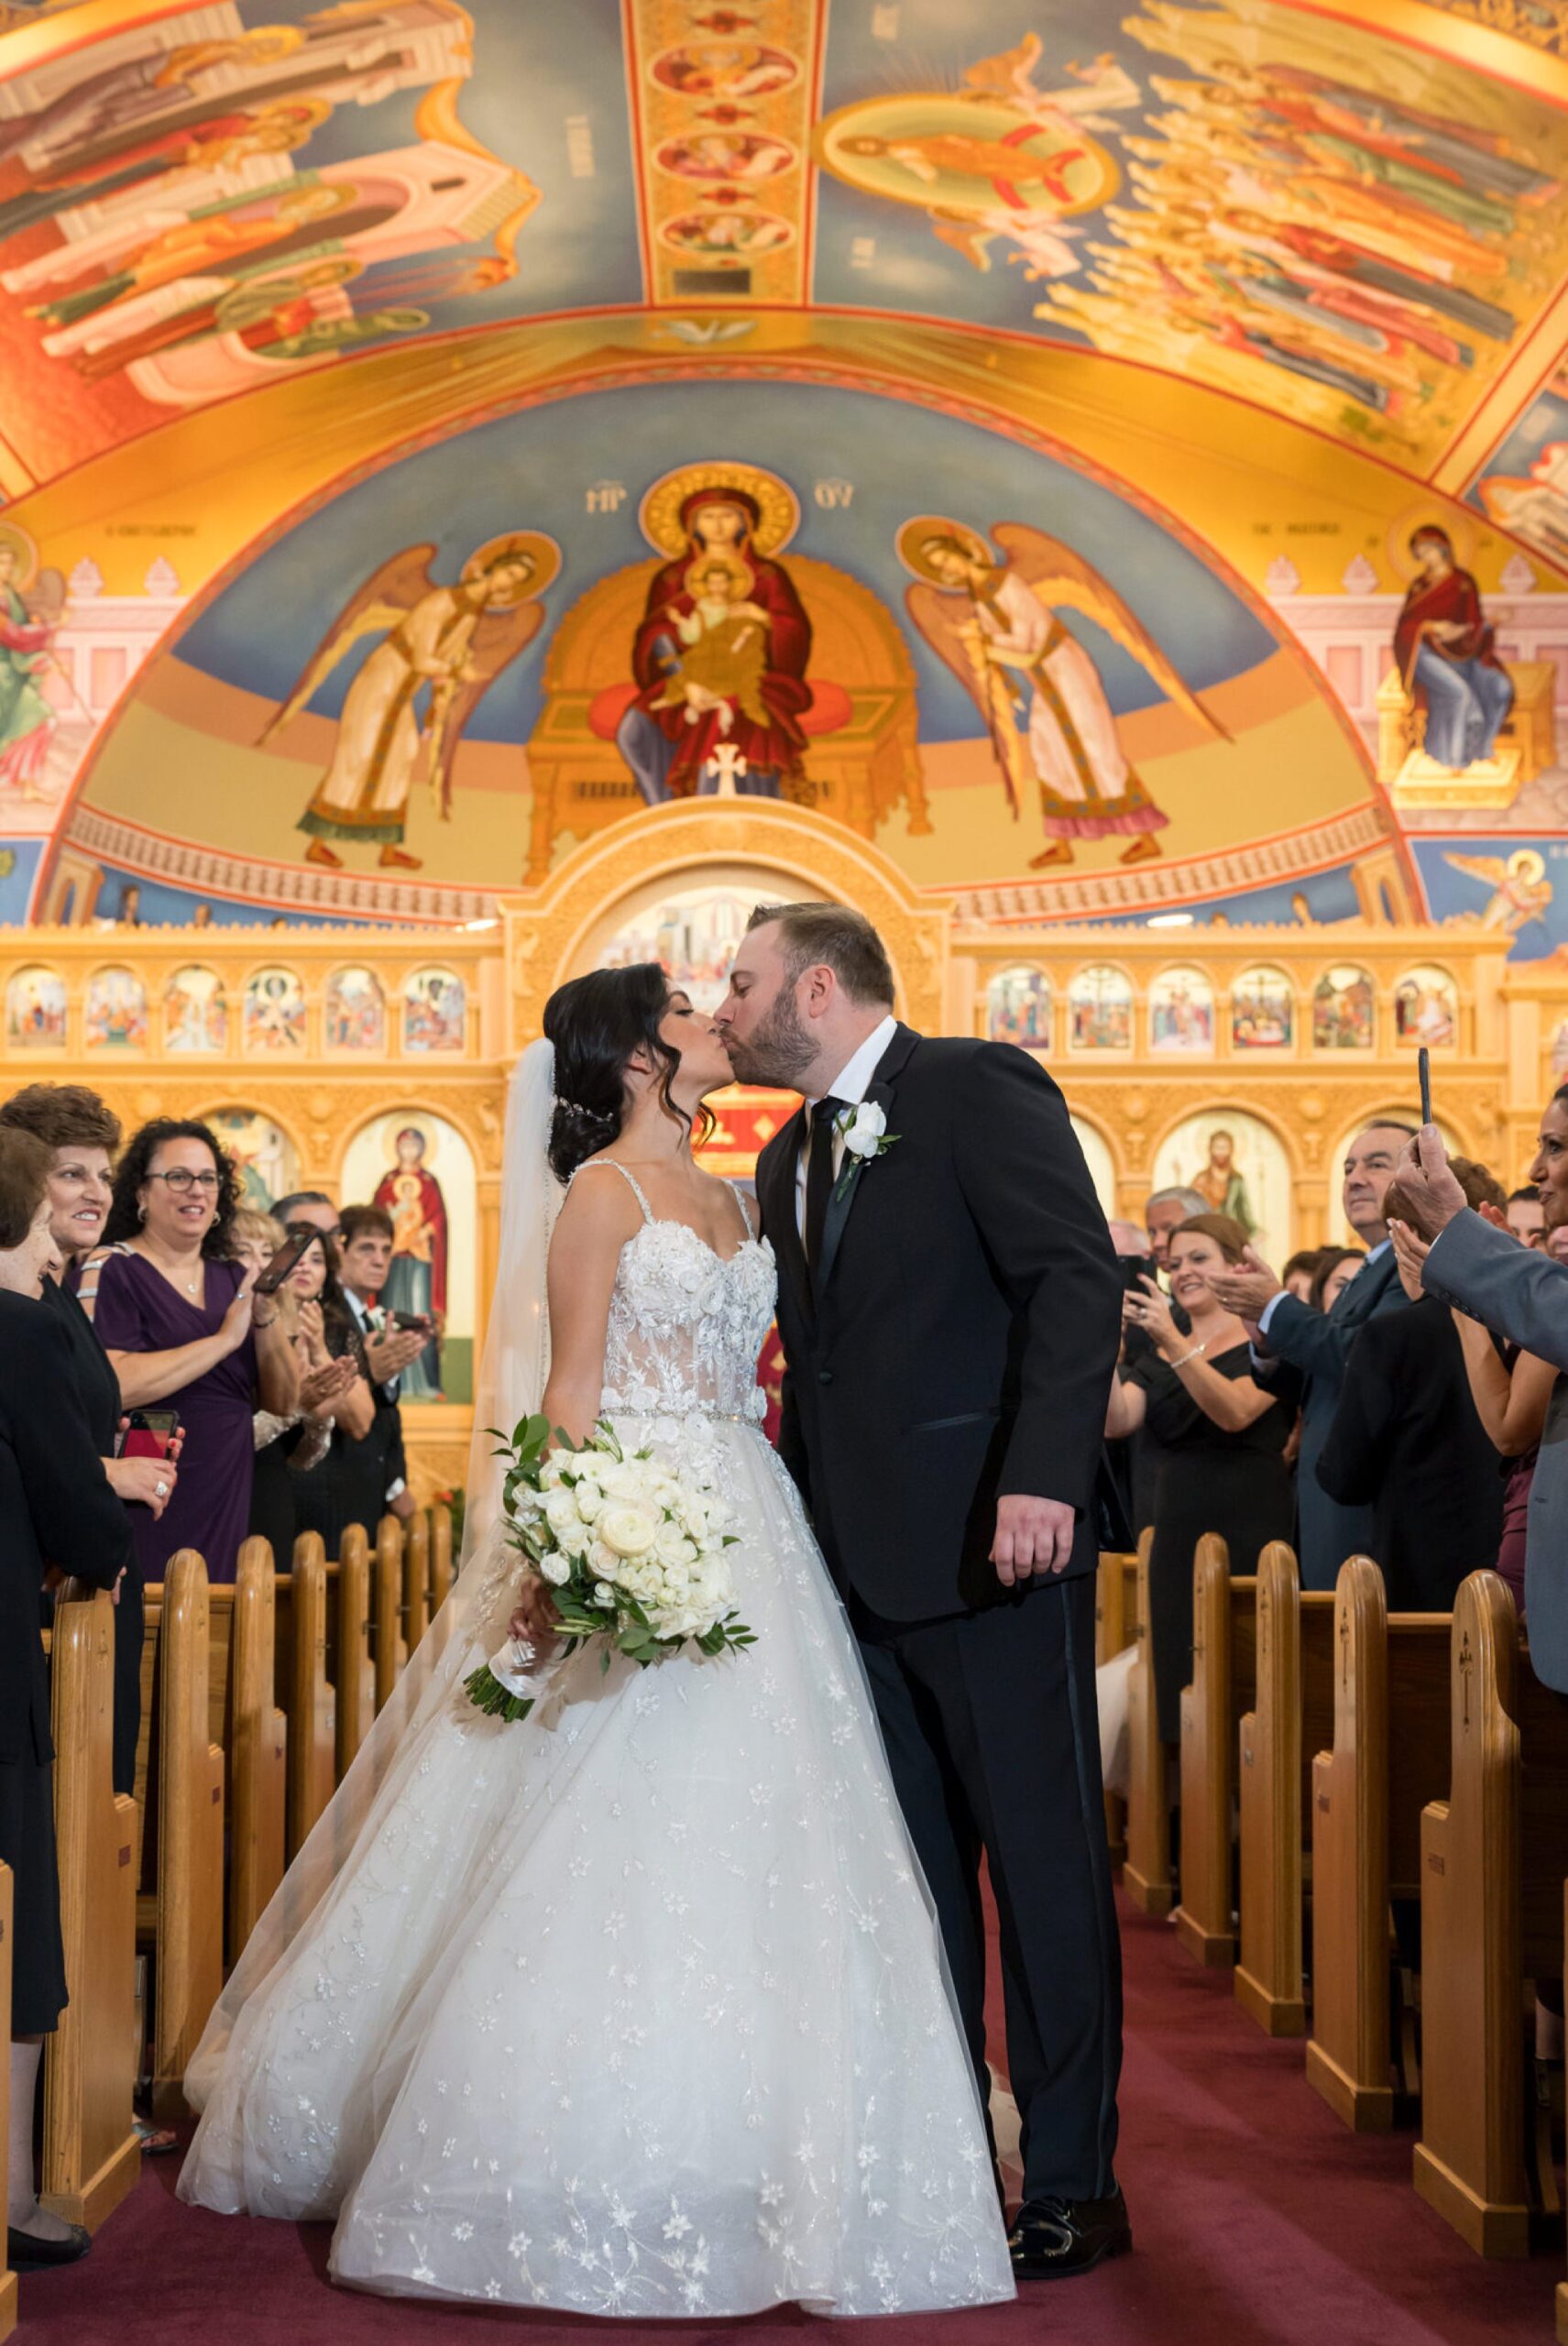 A bride and groom kiss down the center aisle during their Assumption Greek Orthodox wedding in St. Clair Shores, Michigan.